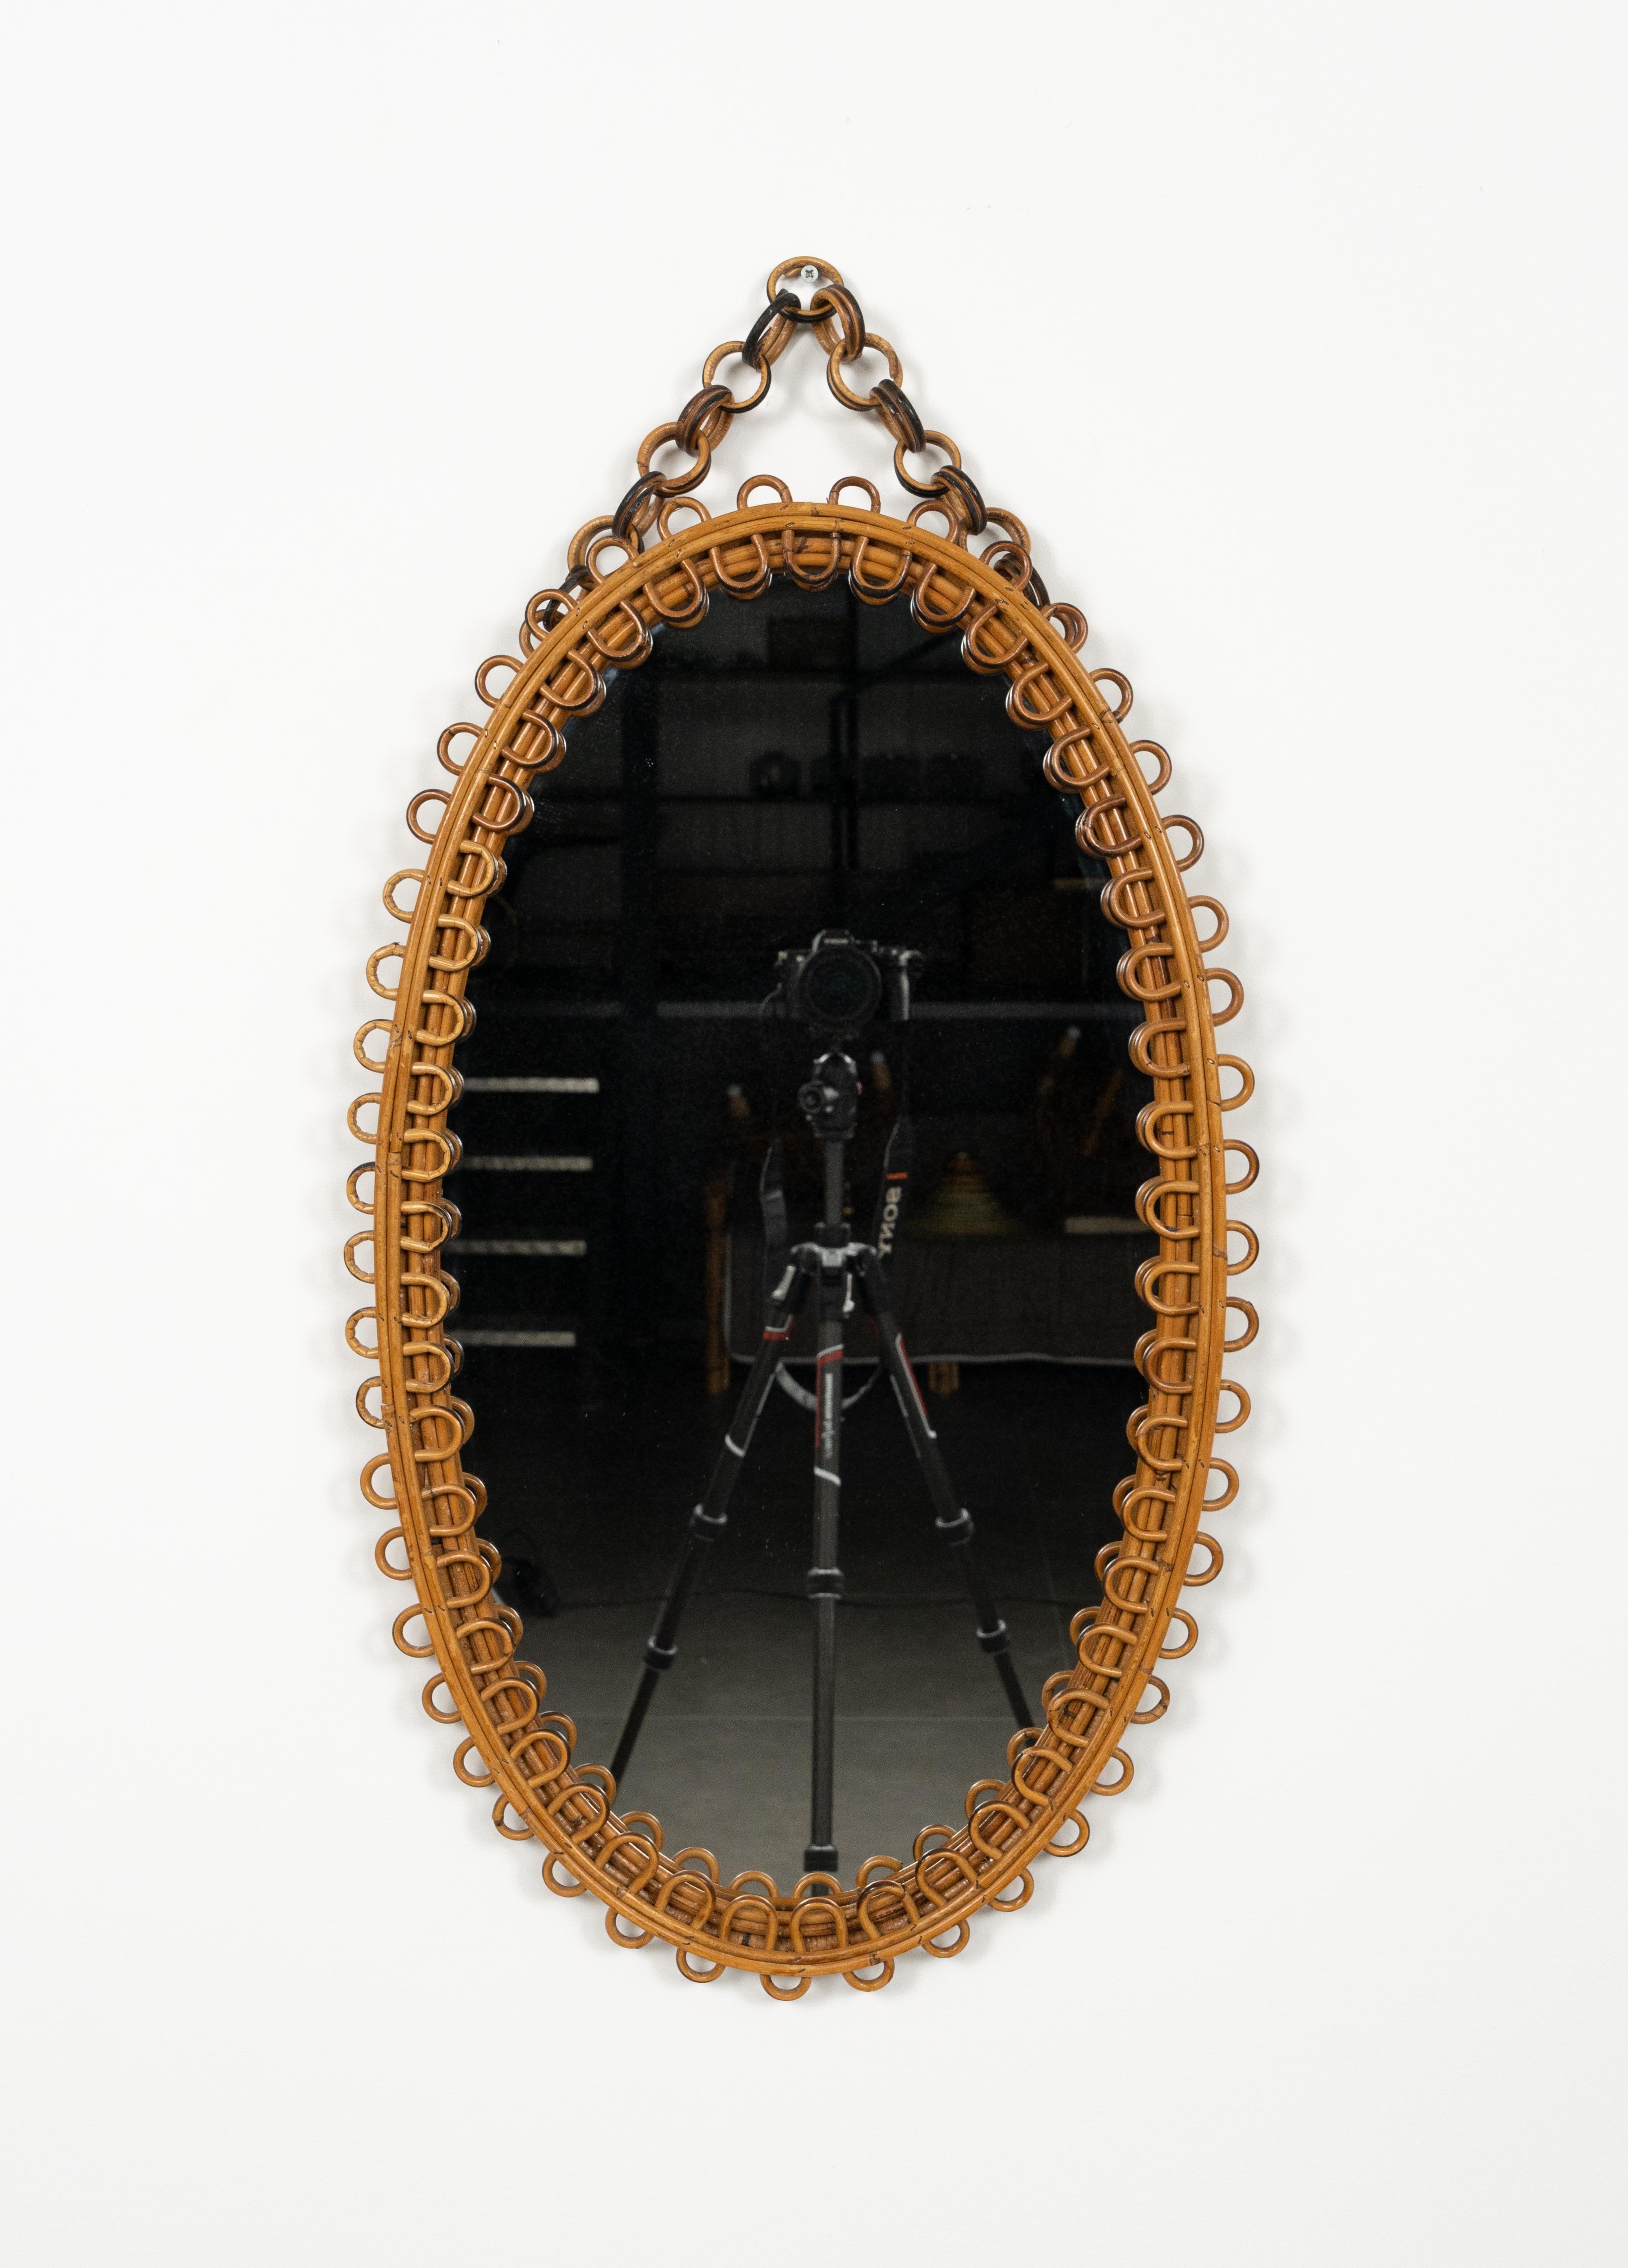 Midcentury beautiful oval wall mirror with chain in bamboo and rattan in the style of Italian design Franco Albini.  

Made in Italy in the 1960s.

Dimensions without chain:  
Height 78 cm.  
Width 46.5 cm. 
Depth 3.5 cm.